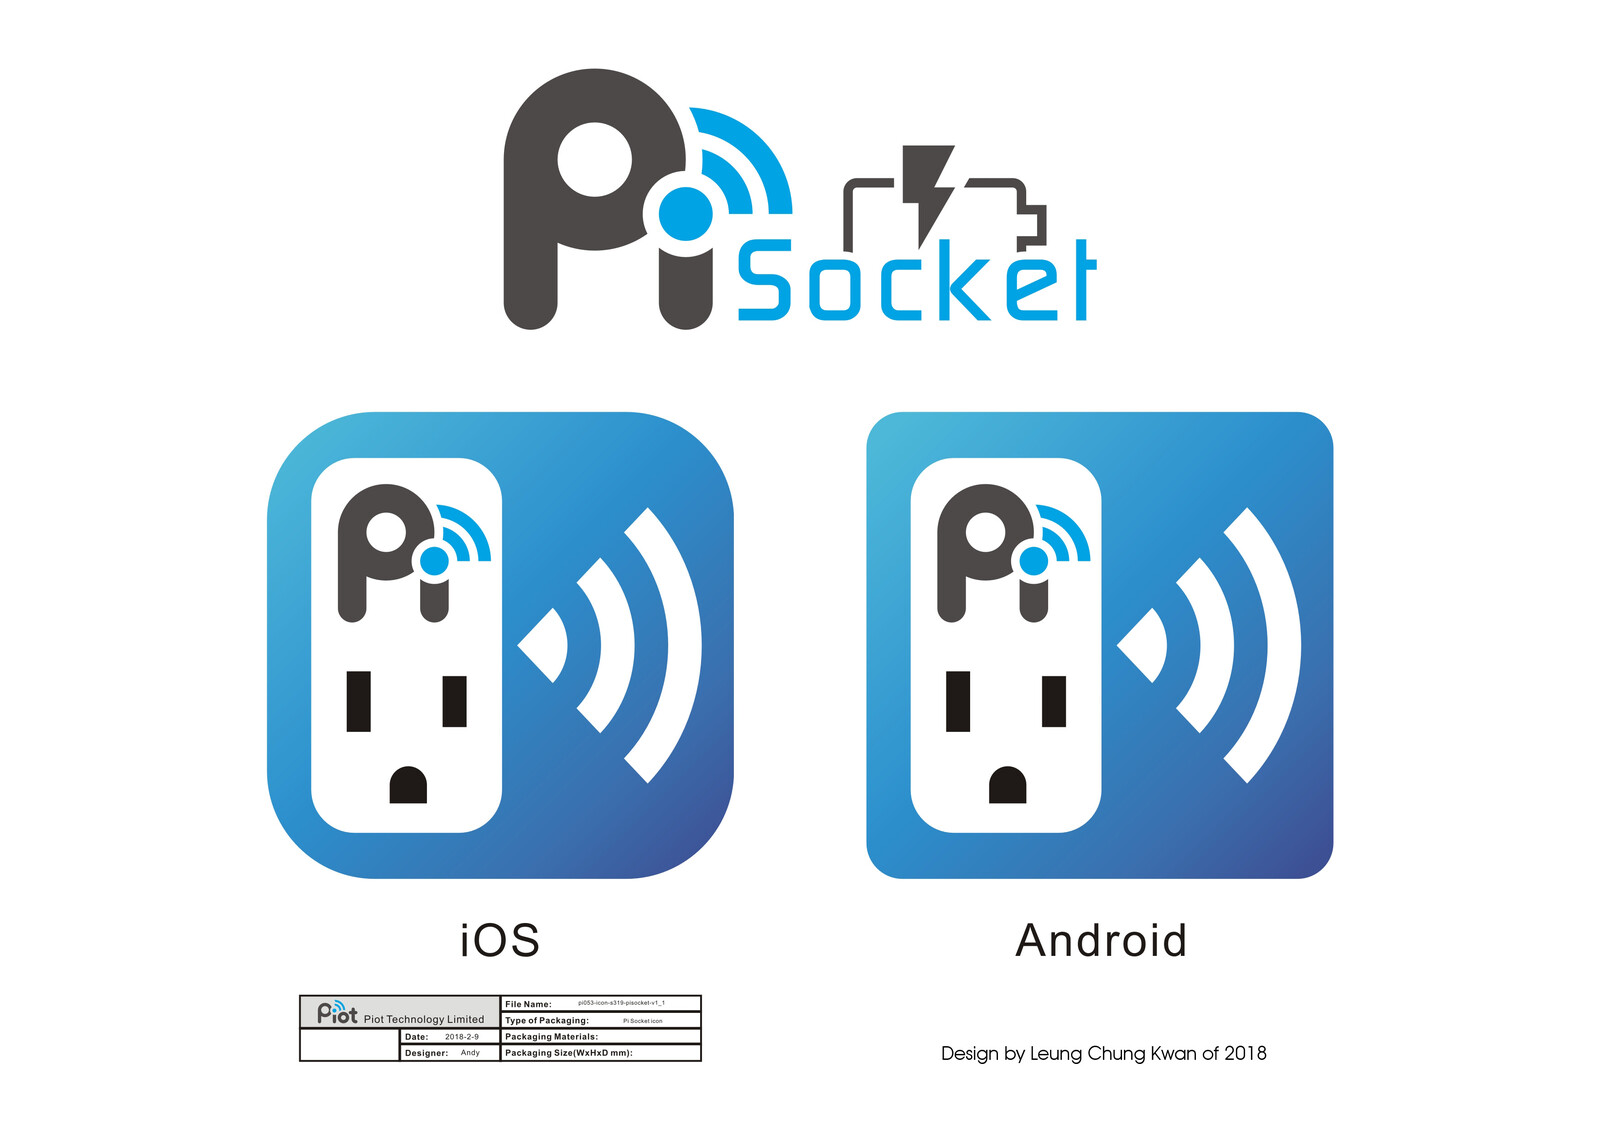 💎 App Icon | Design by Leung Chung Kwan on 2018 💎
App Name︰Pisocket | Client︰Piot Technology Limited